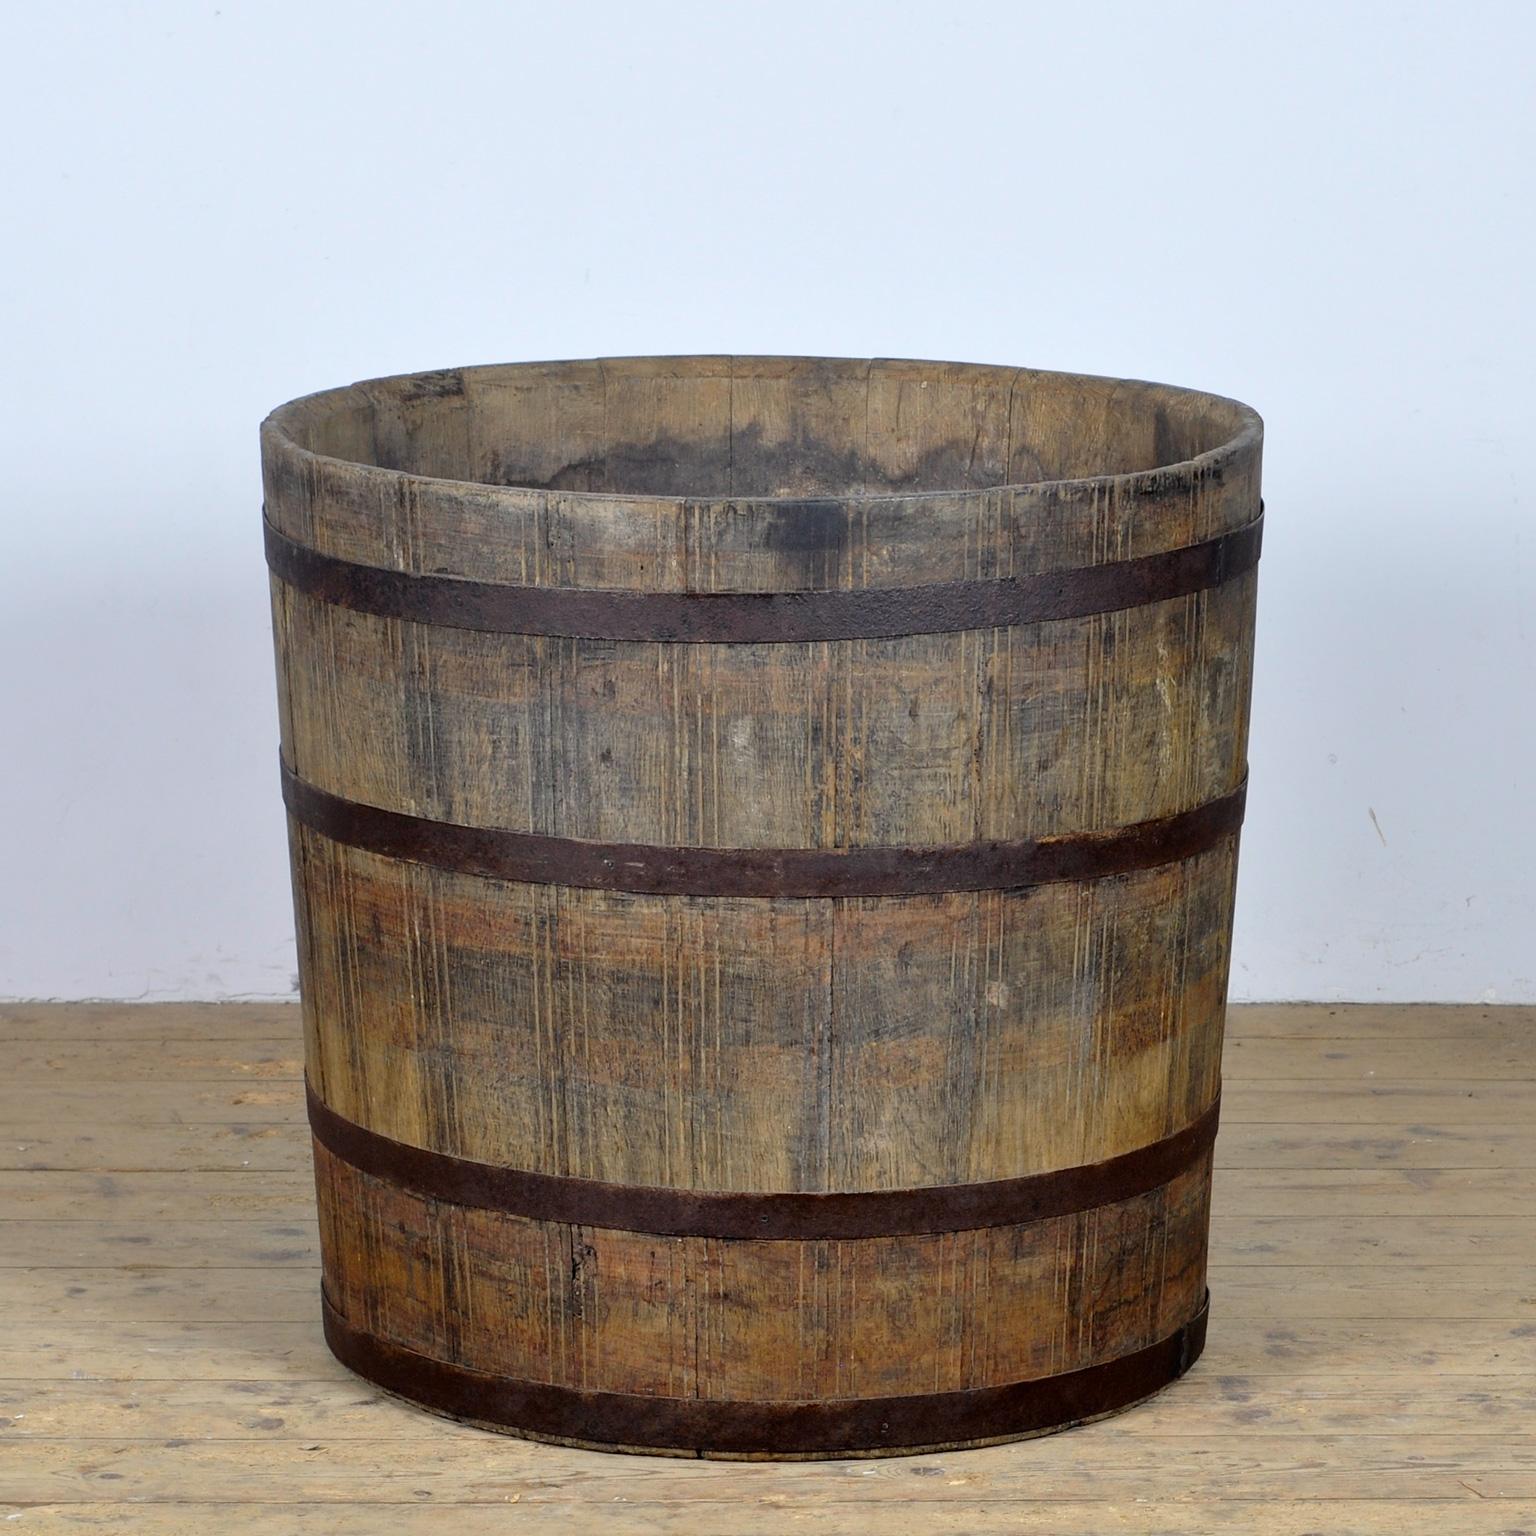  Oak barrelled planter, with revited iron bands to secure. This barrel was used for the storage of grain or corn. Circa 1900. 